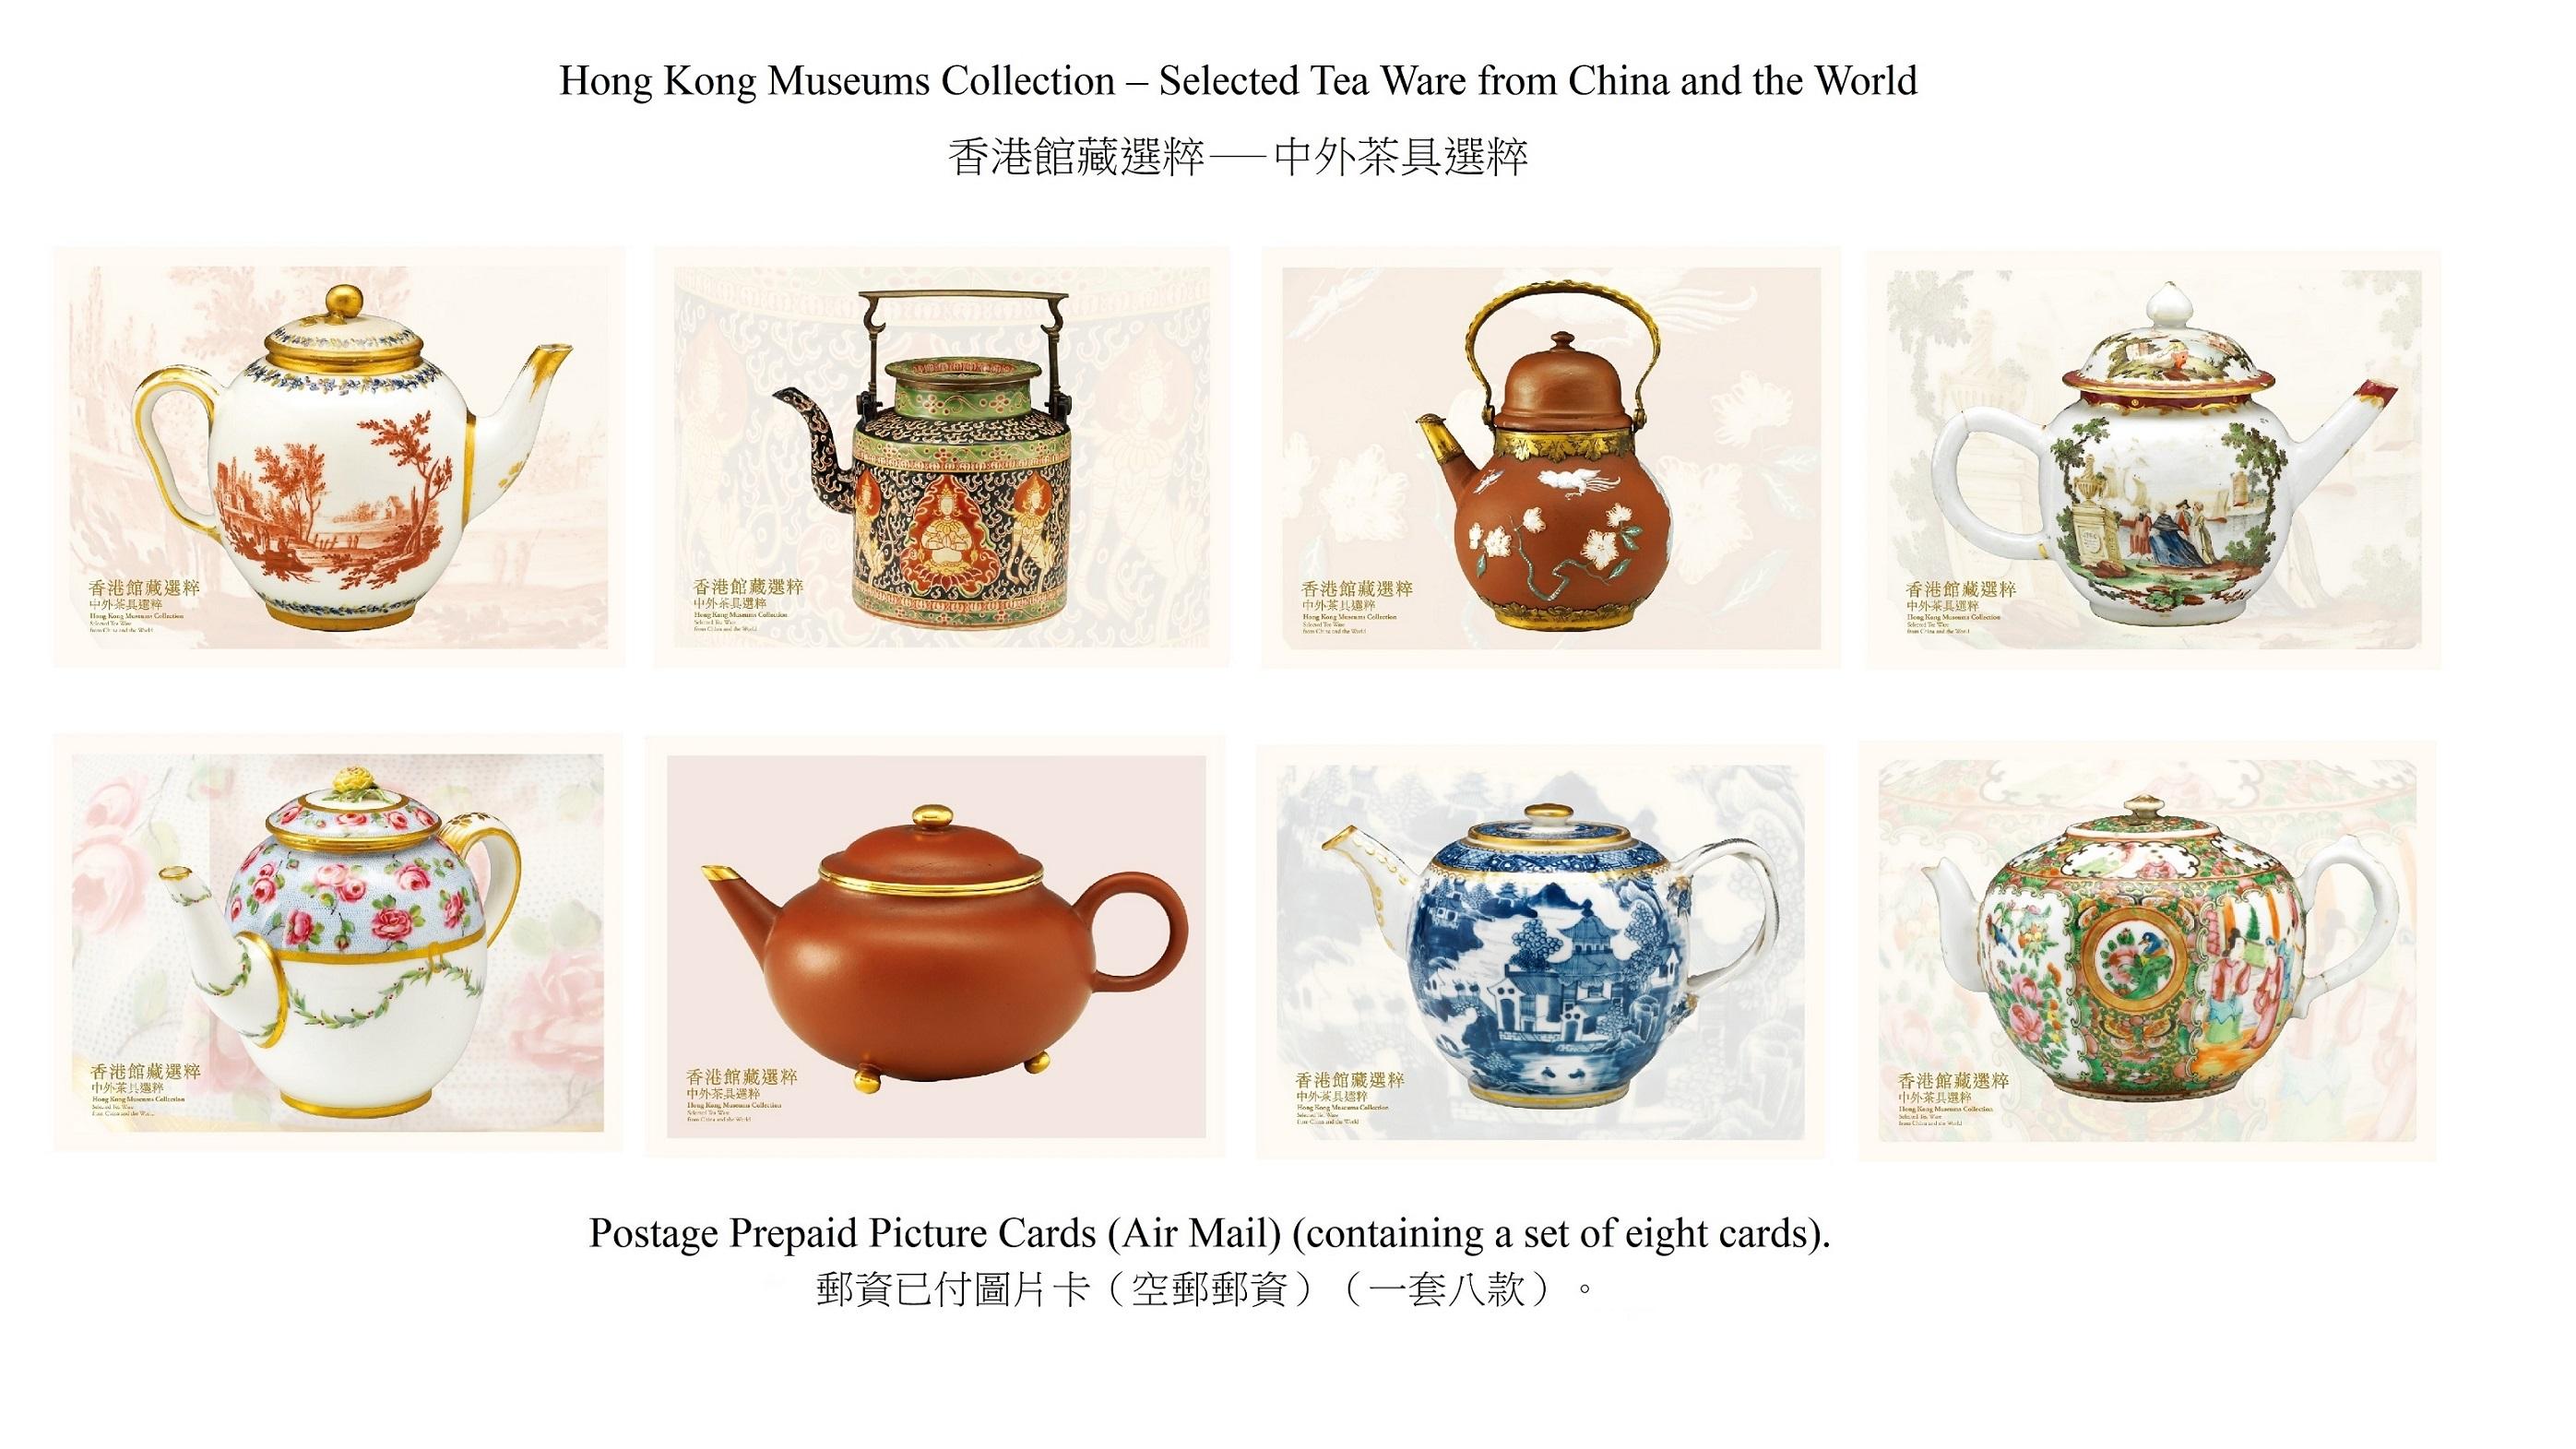 Hongkong Post will launch a special stamp issue and associated philatelic products on the theme of "Hong Kong Museums Collection - Selected Tea Ware from China and the World" on April 18 (Thursday). Photos show the postage prepaid picture cards (air mail).
